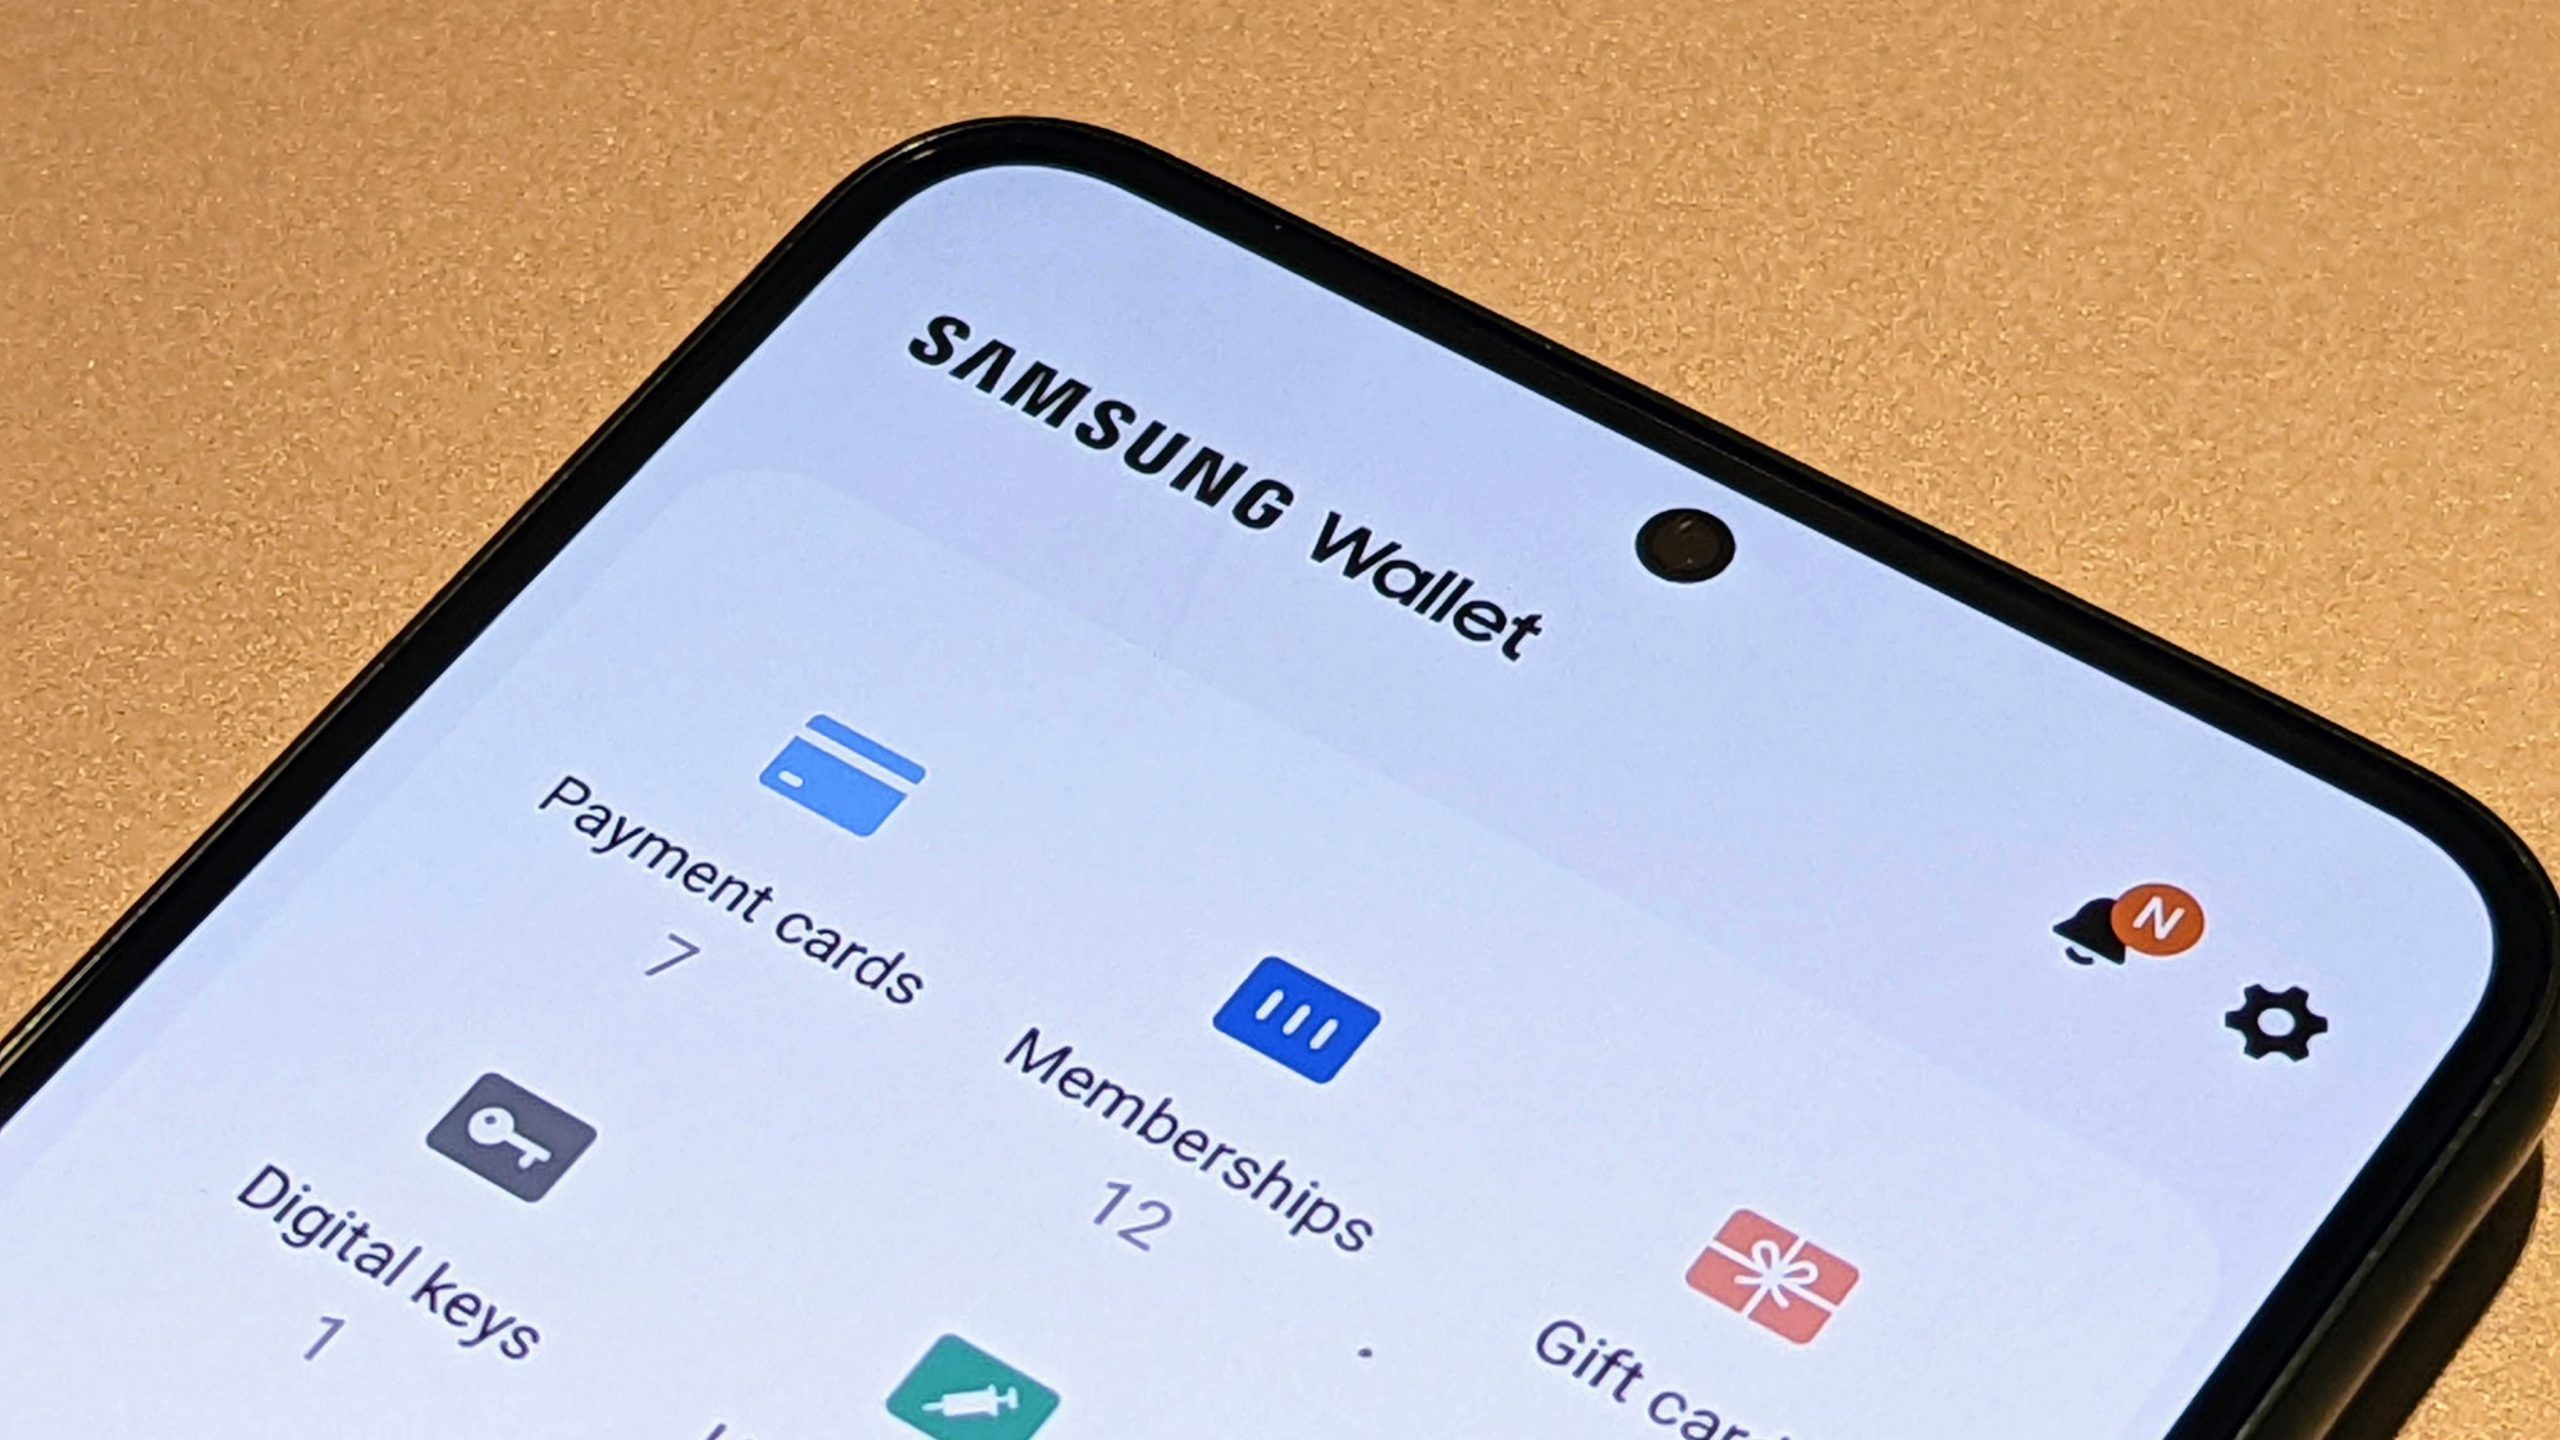 Samsung is merging Samsung Pass and Pay into a single Samsung Wallet app